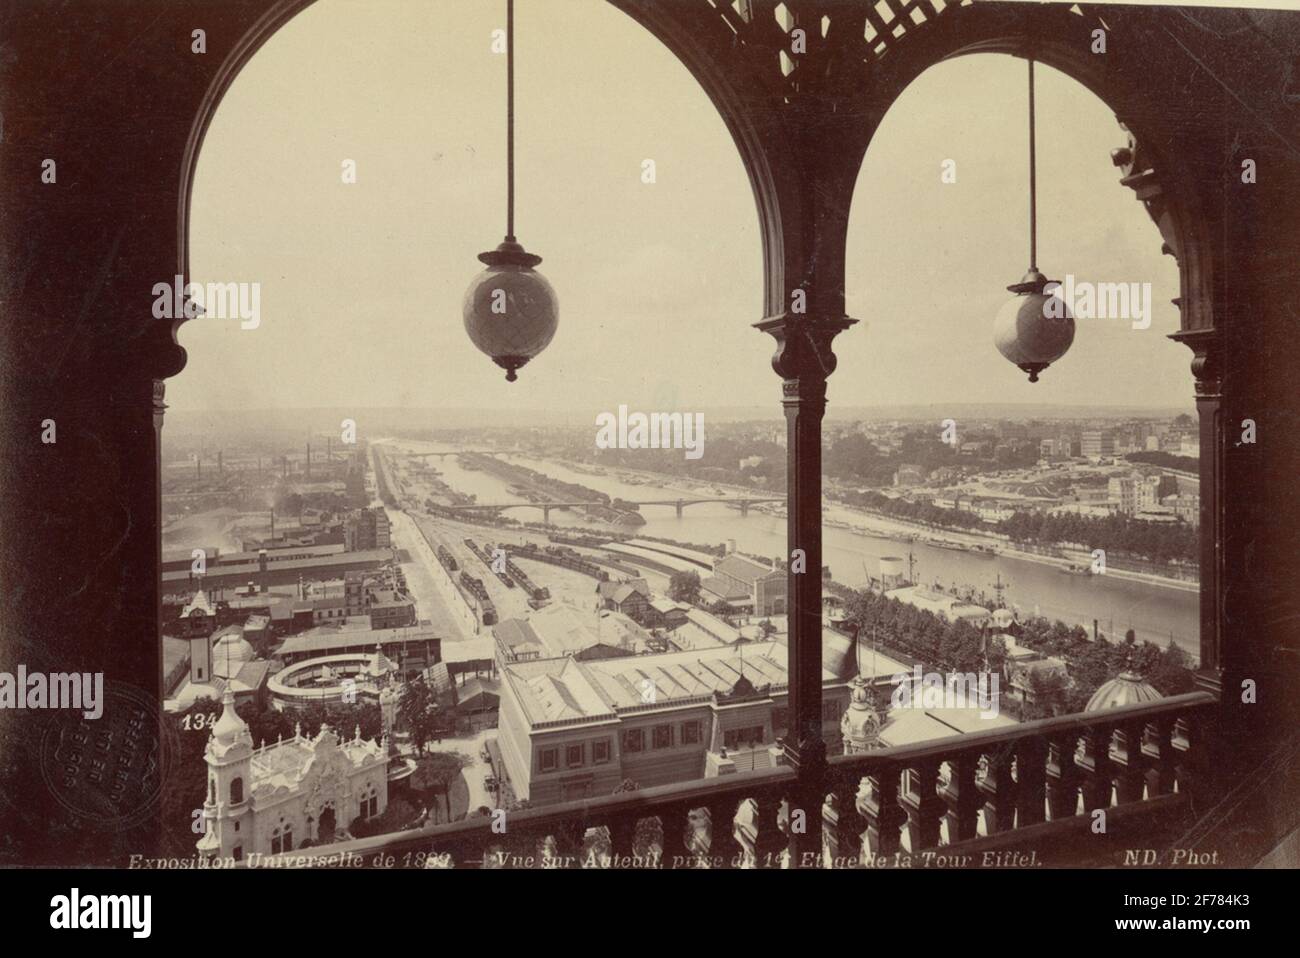 From Album: Foreign trip 1890. View of the World Exposition in Paris 1889, Exposition Universal. Stock Photo